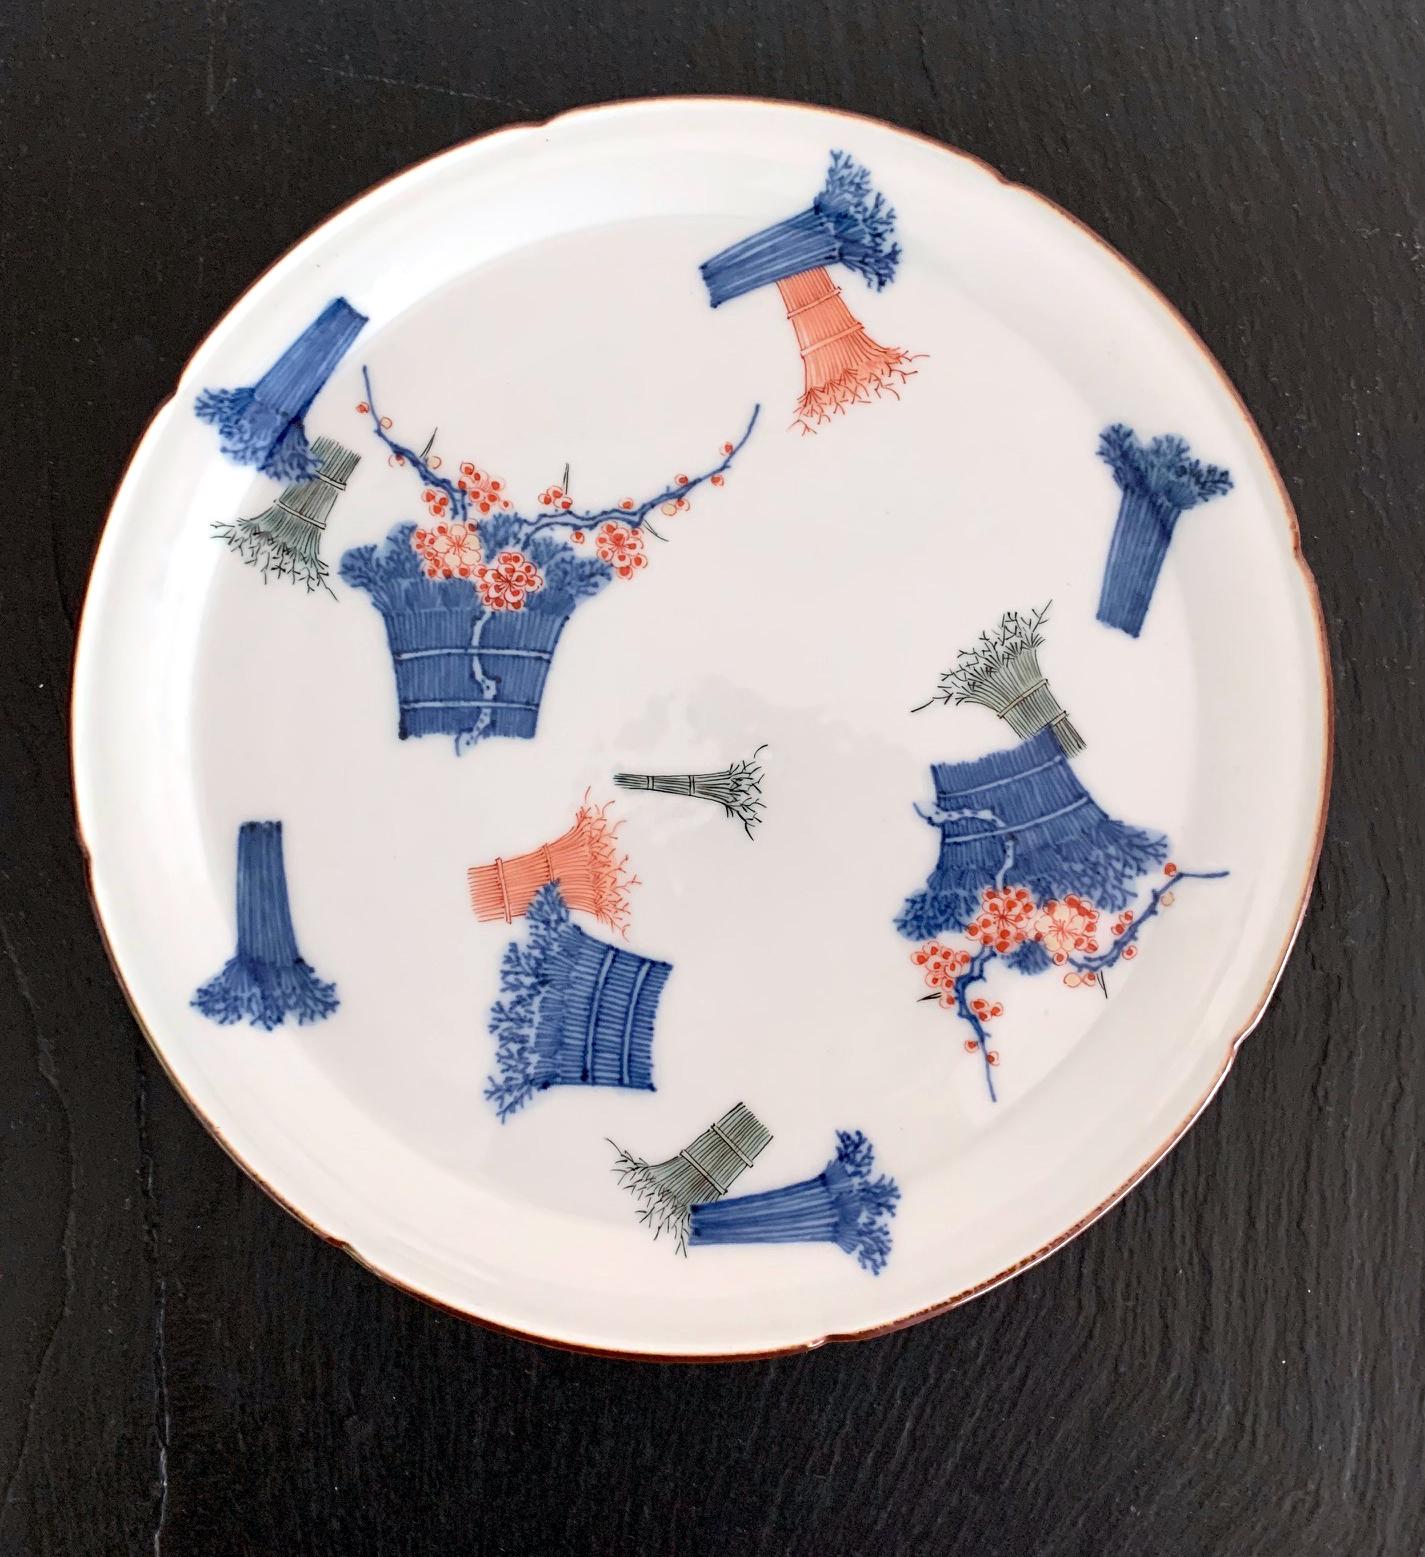 A milky white dish with slight scalloped rim and decorated with cobalt blue iron red and green enamel over glaze, this delicate piece in Kakiemon Style was dated at least to the early 18th century if not earlier, likely made for export market to the